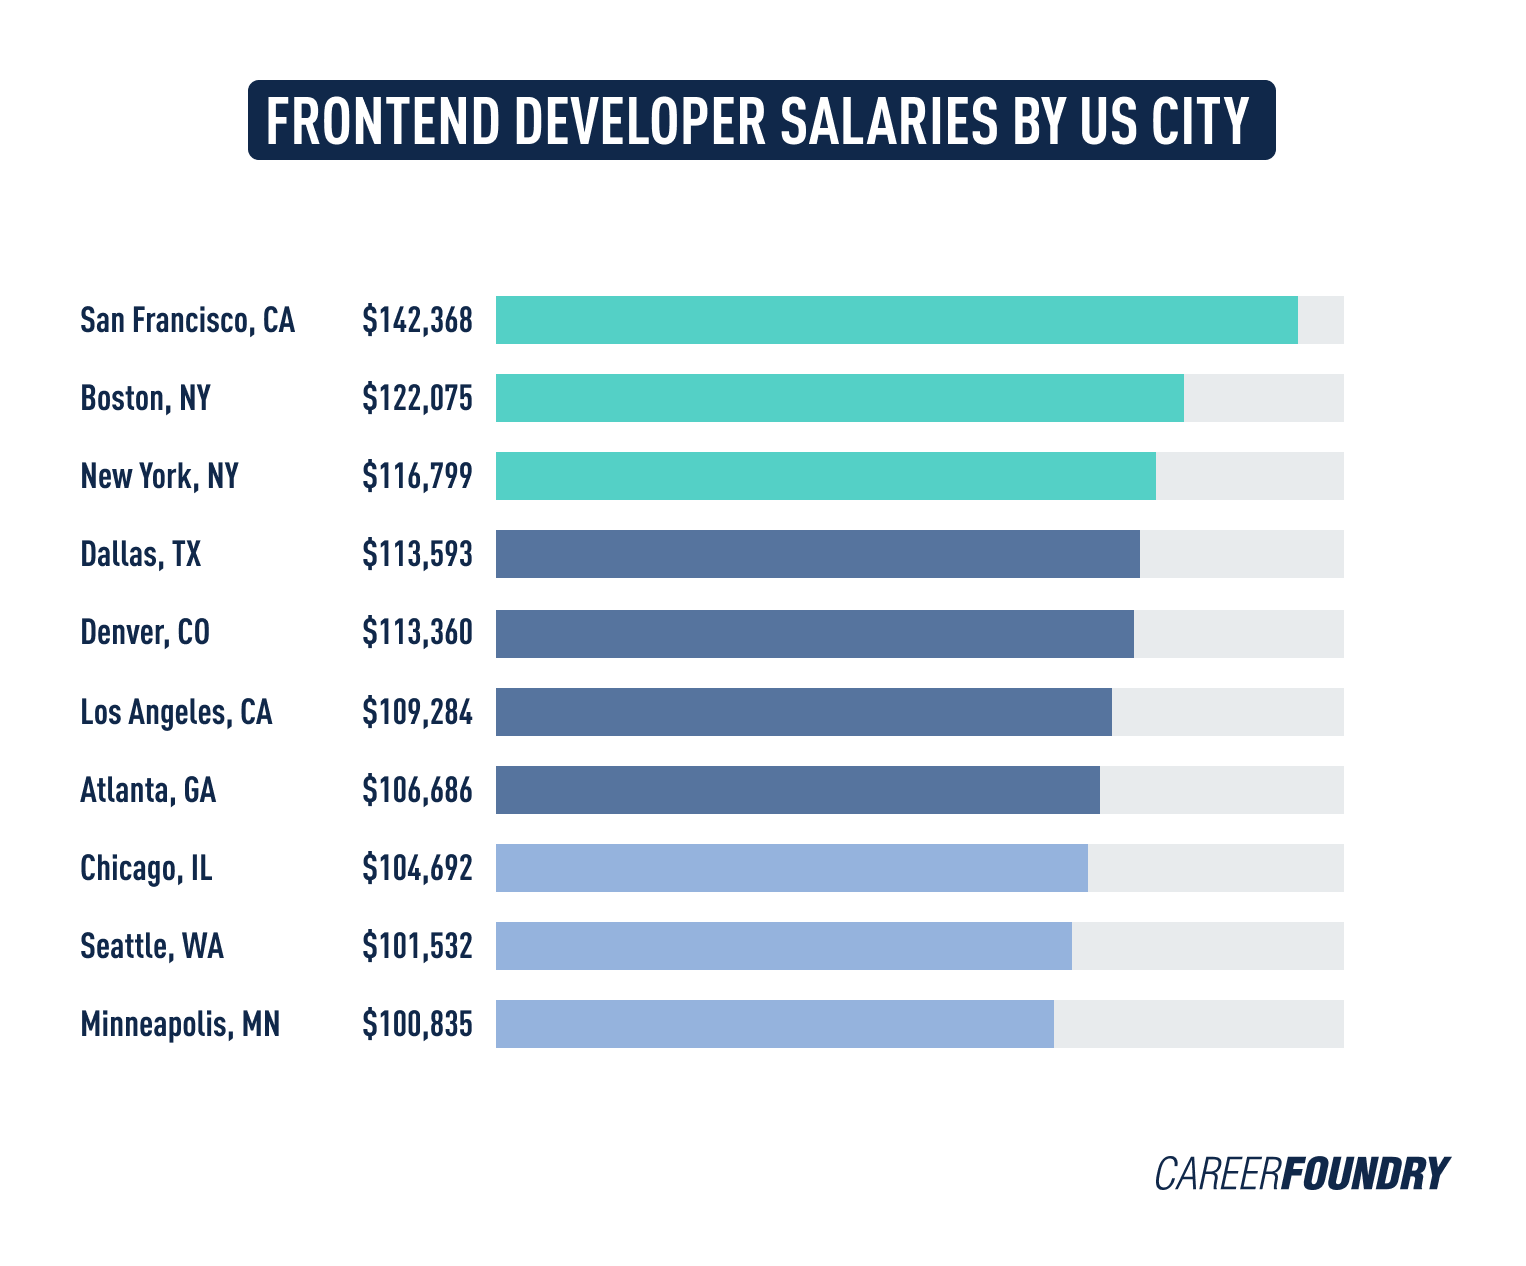 A graph displaying frontend developer salaries by major U.S. city.